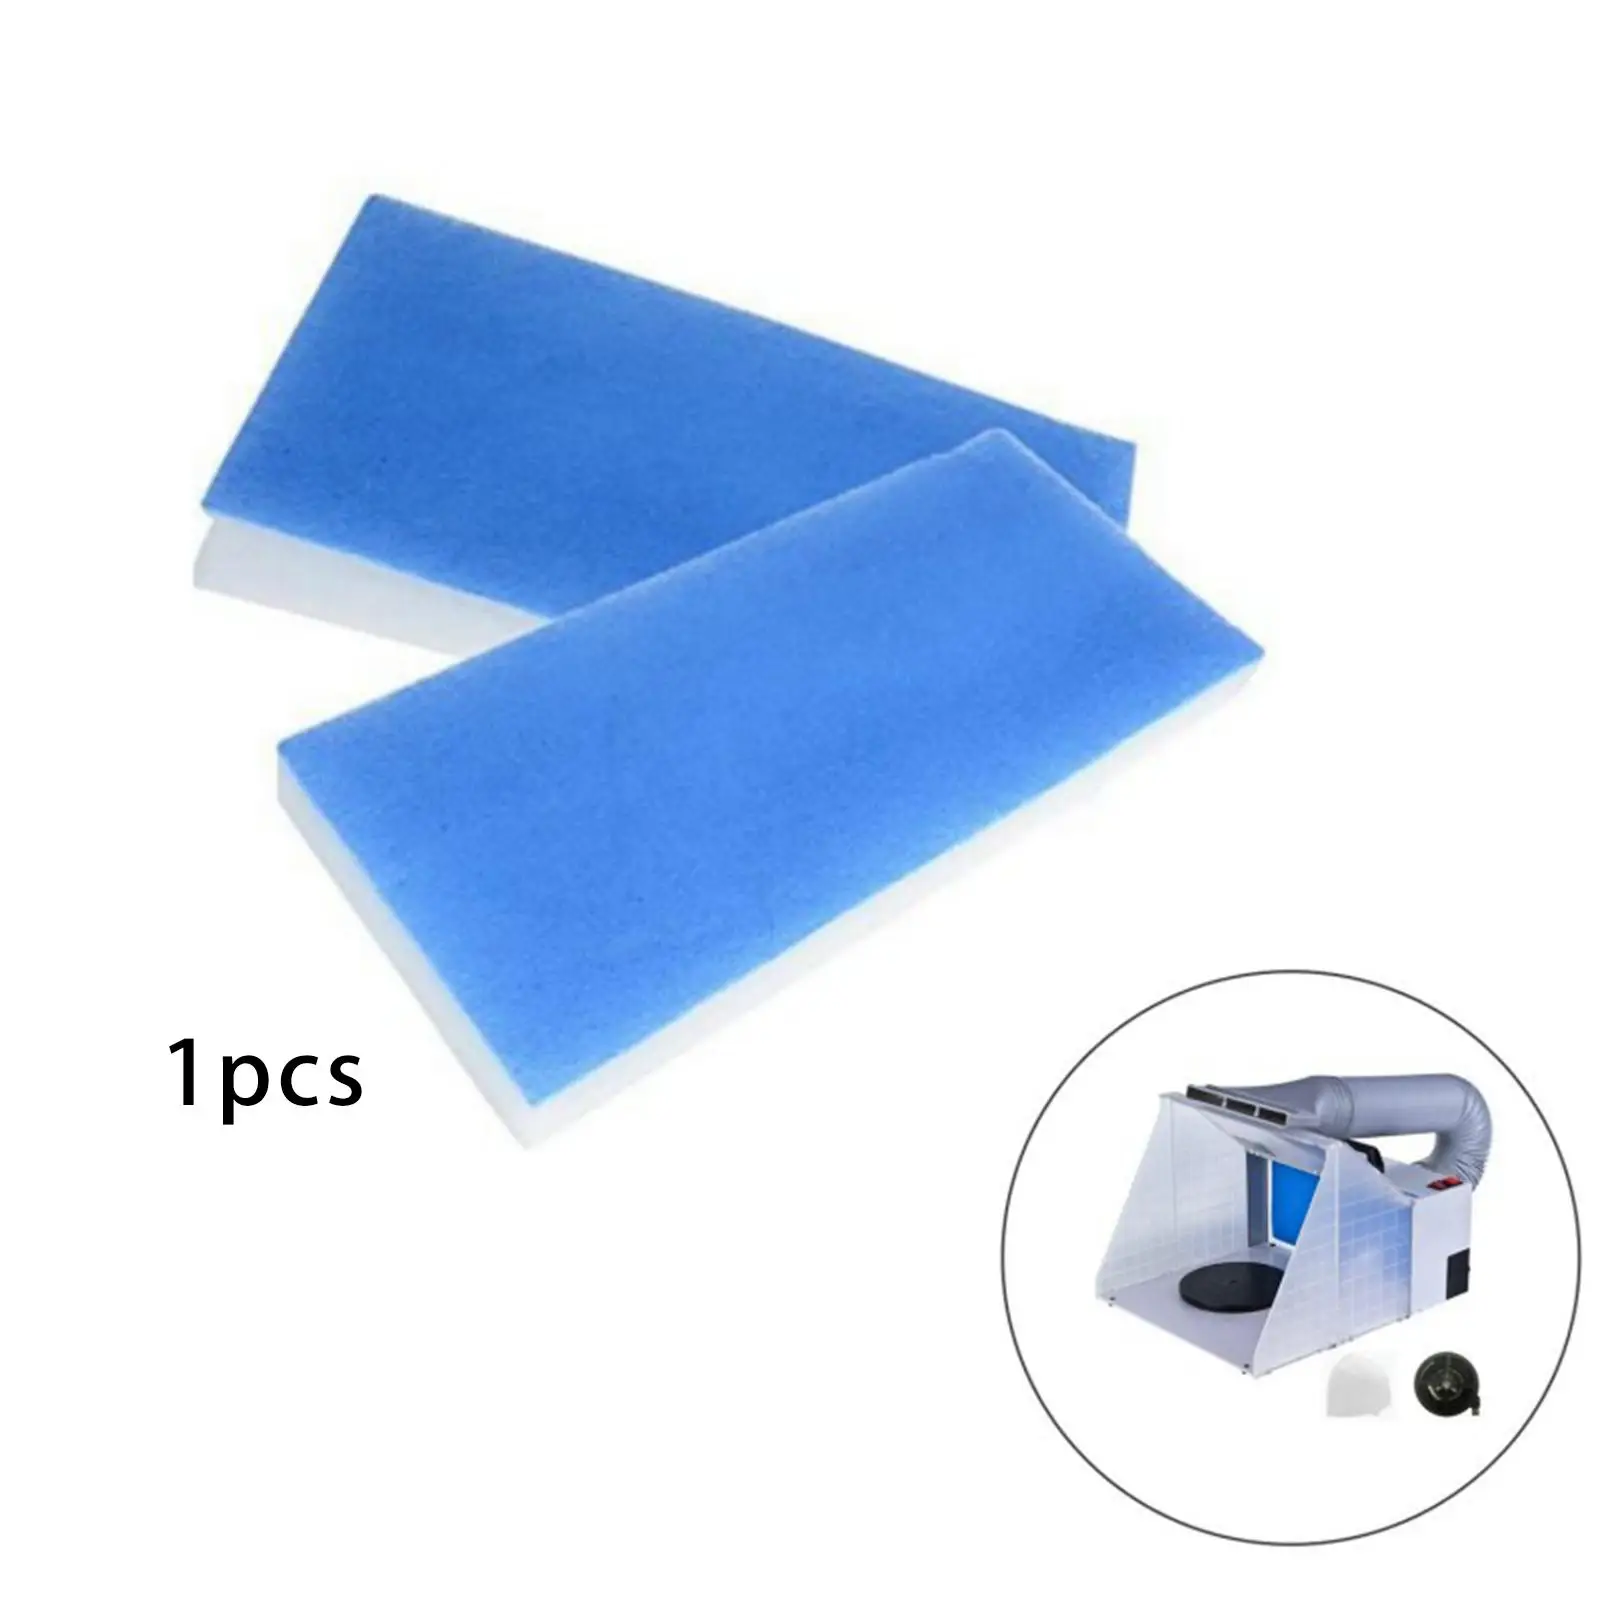 1Pcs Spray Booth Filter Replaceable Fiberglass Filter Pad High Quality Material for Master, Paasche Sky Enterprise, Airhobby